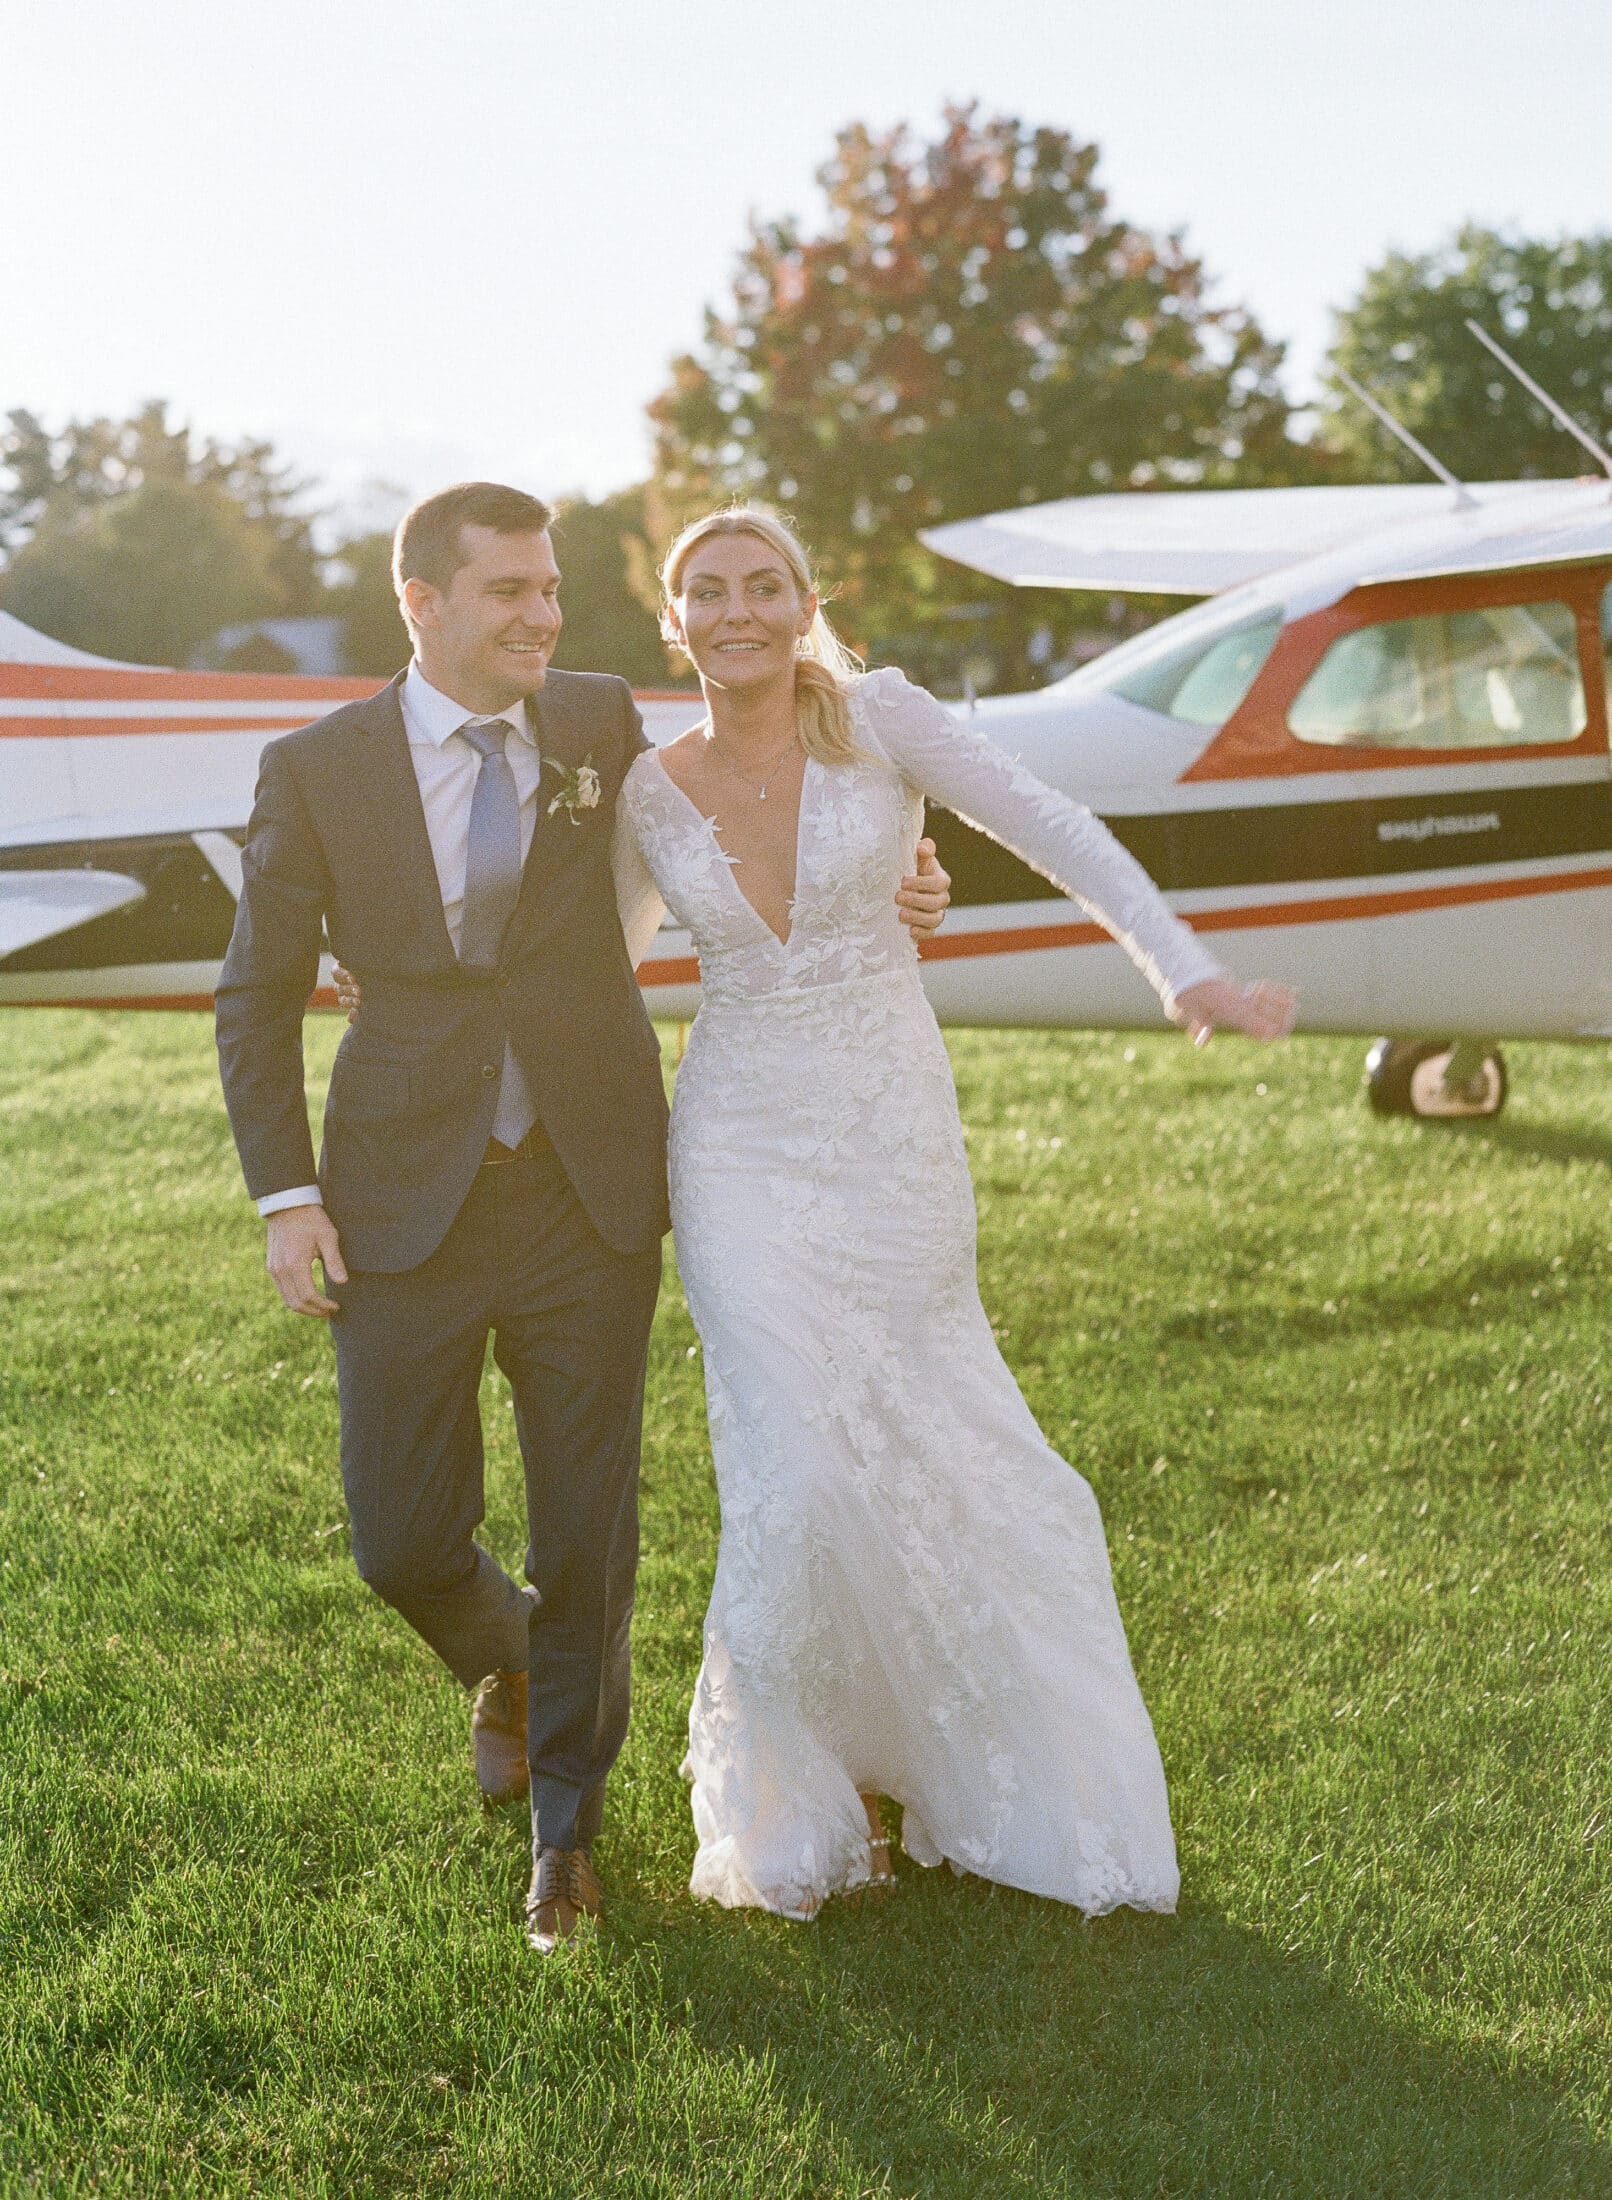 Bride and groom getting off their private flight entrace on the airstrip